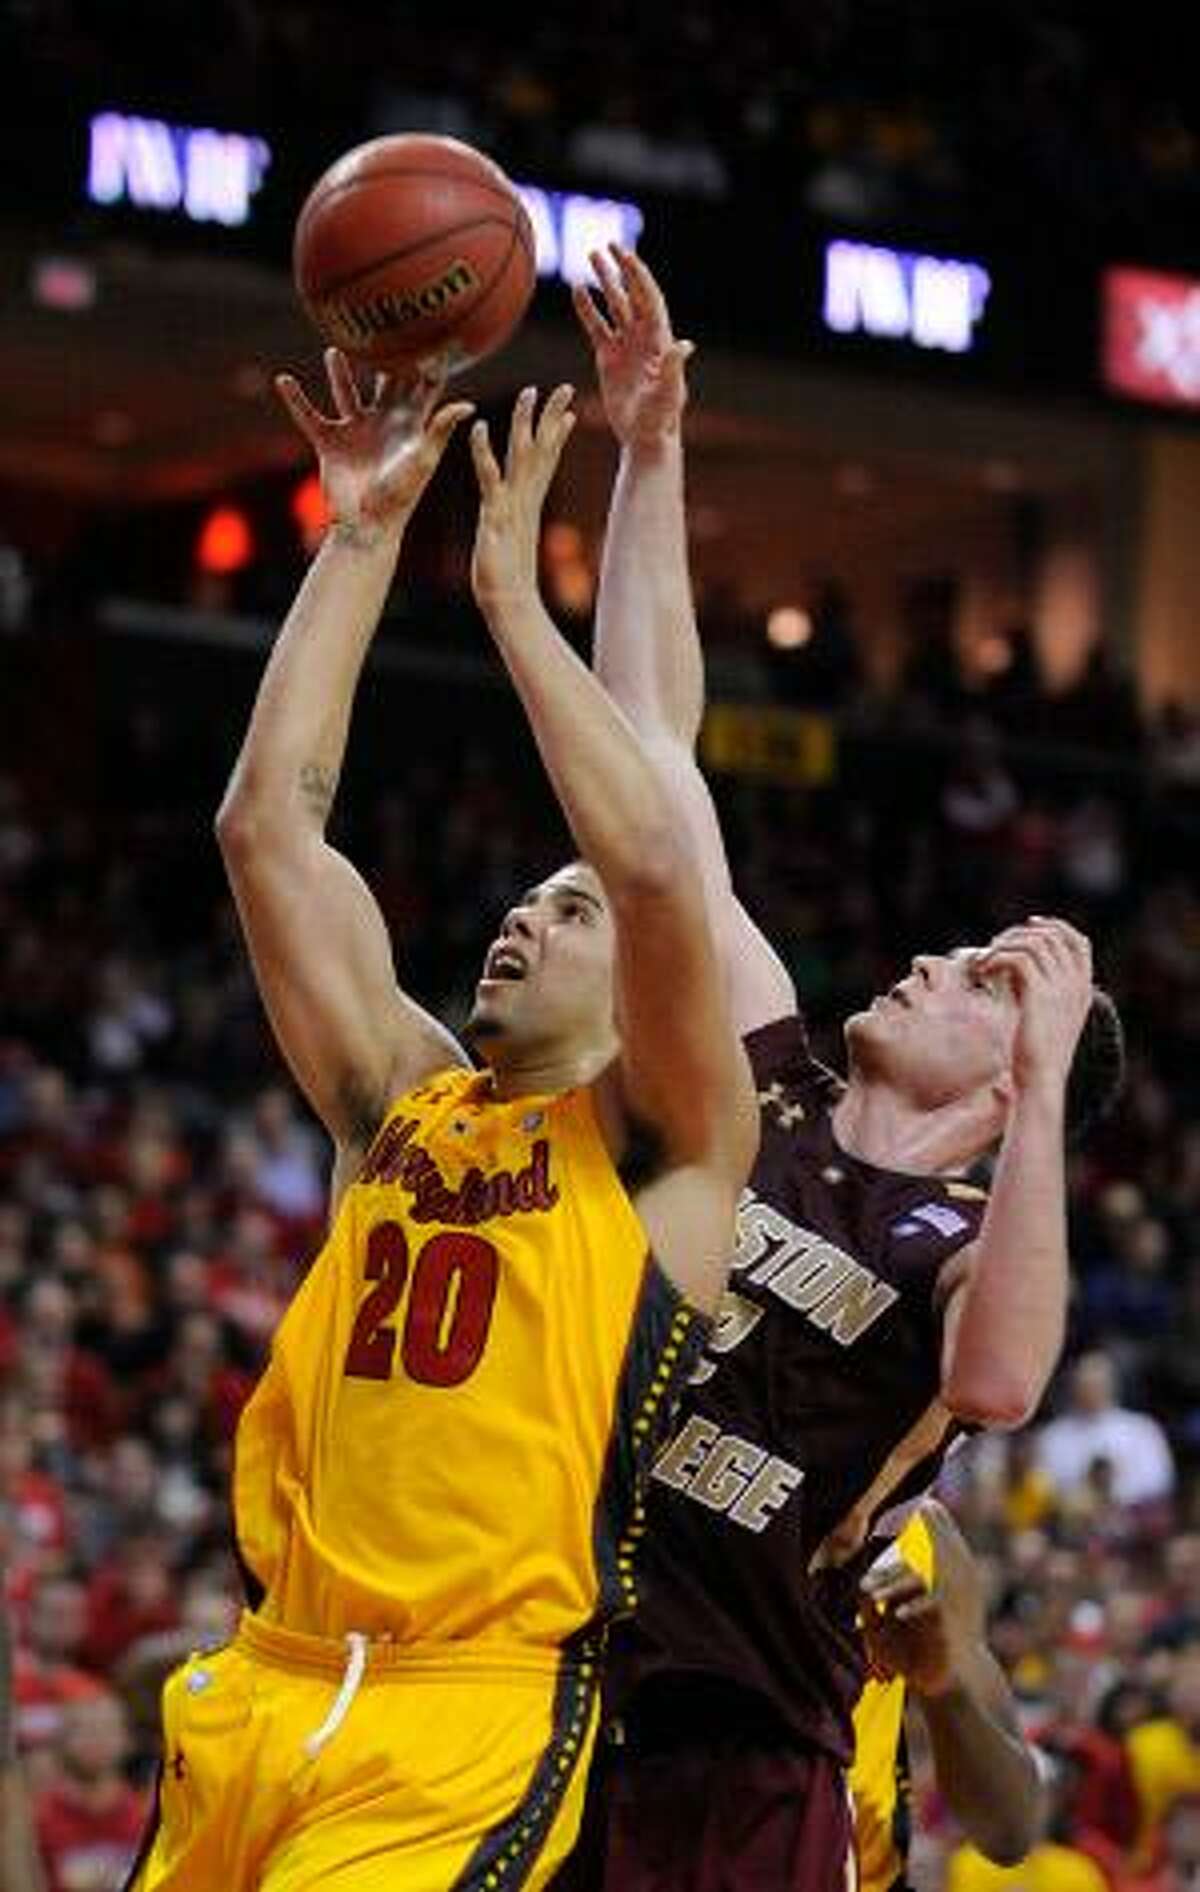 Maryland's Jordan Williams, left, shoots and is fouled by Boston College's Joe Trapani in the second half of a game, Sunday, in College Park, Md. Boston College won 79-75. (AP Photo/Gail Burton)